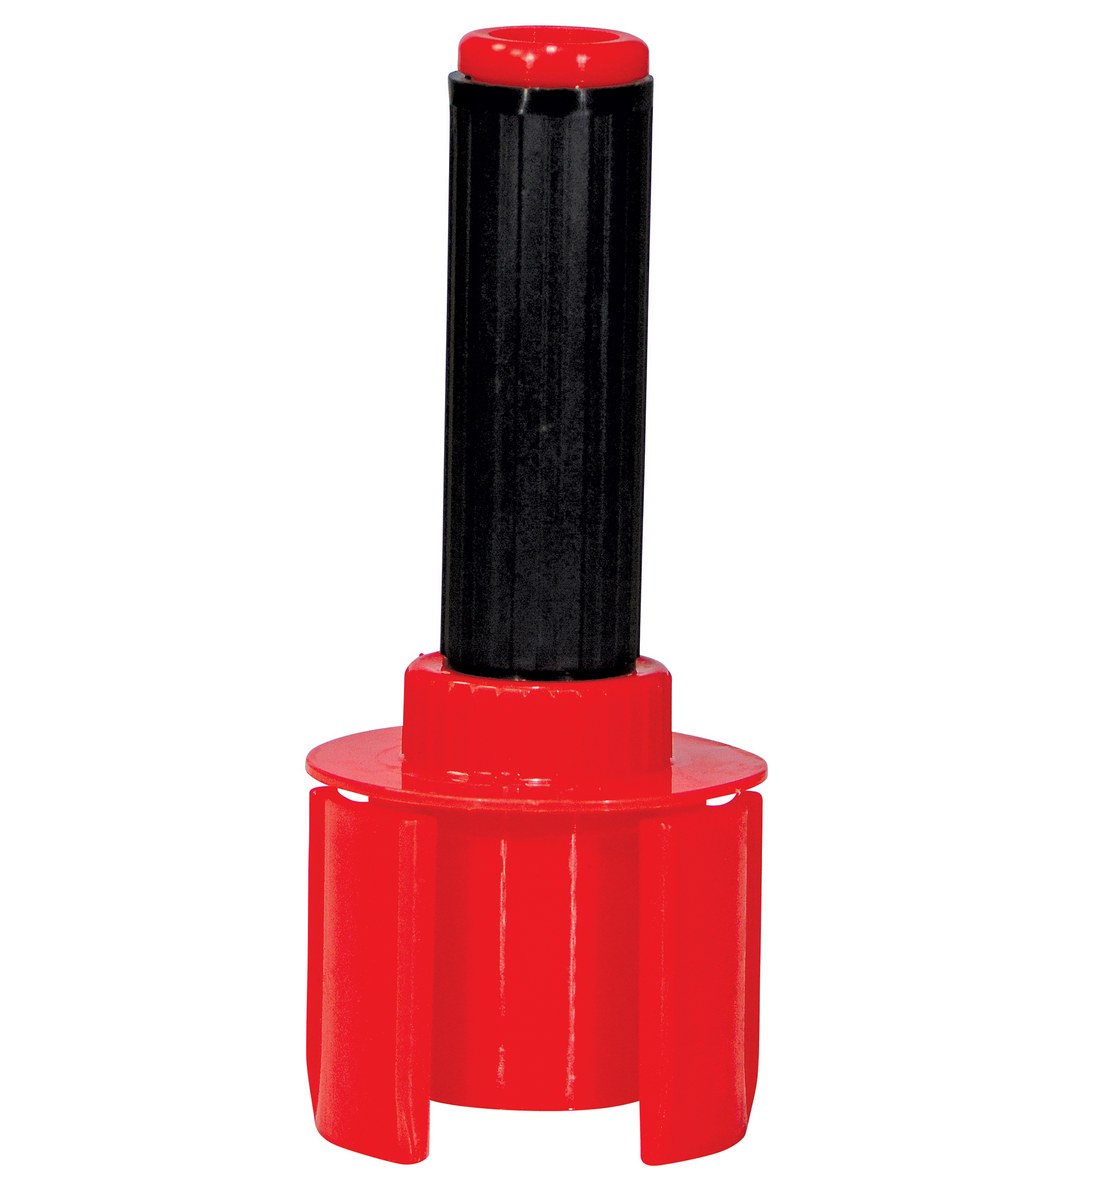 100 Handles Red Tension Handle Plastic Dispenser for Extended Core & Pipe Wrap Stretch Film 